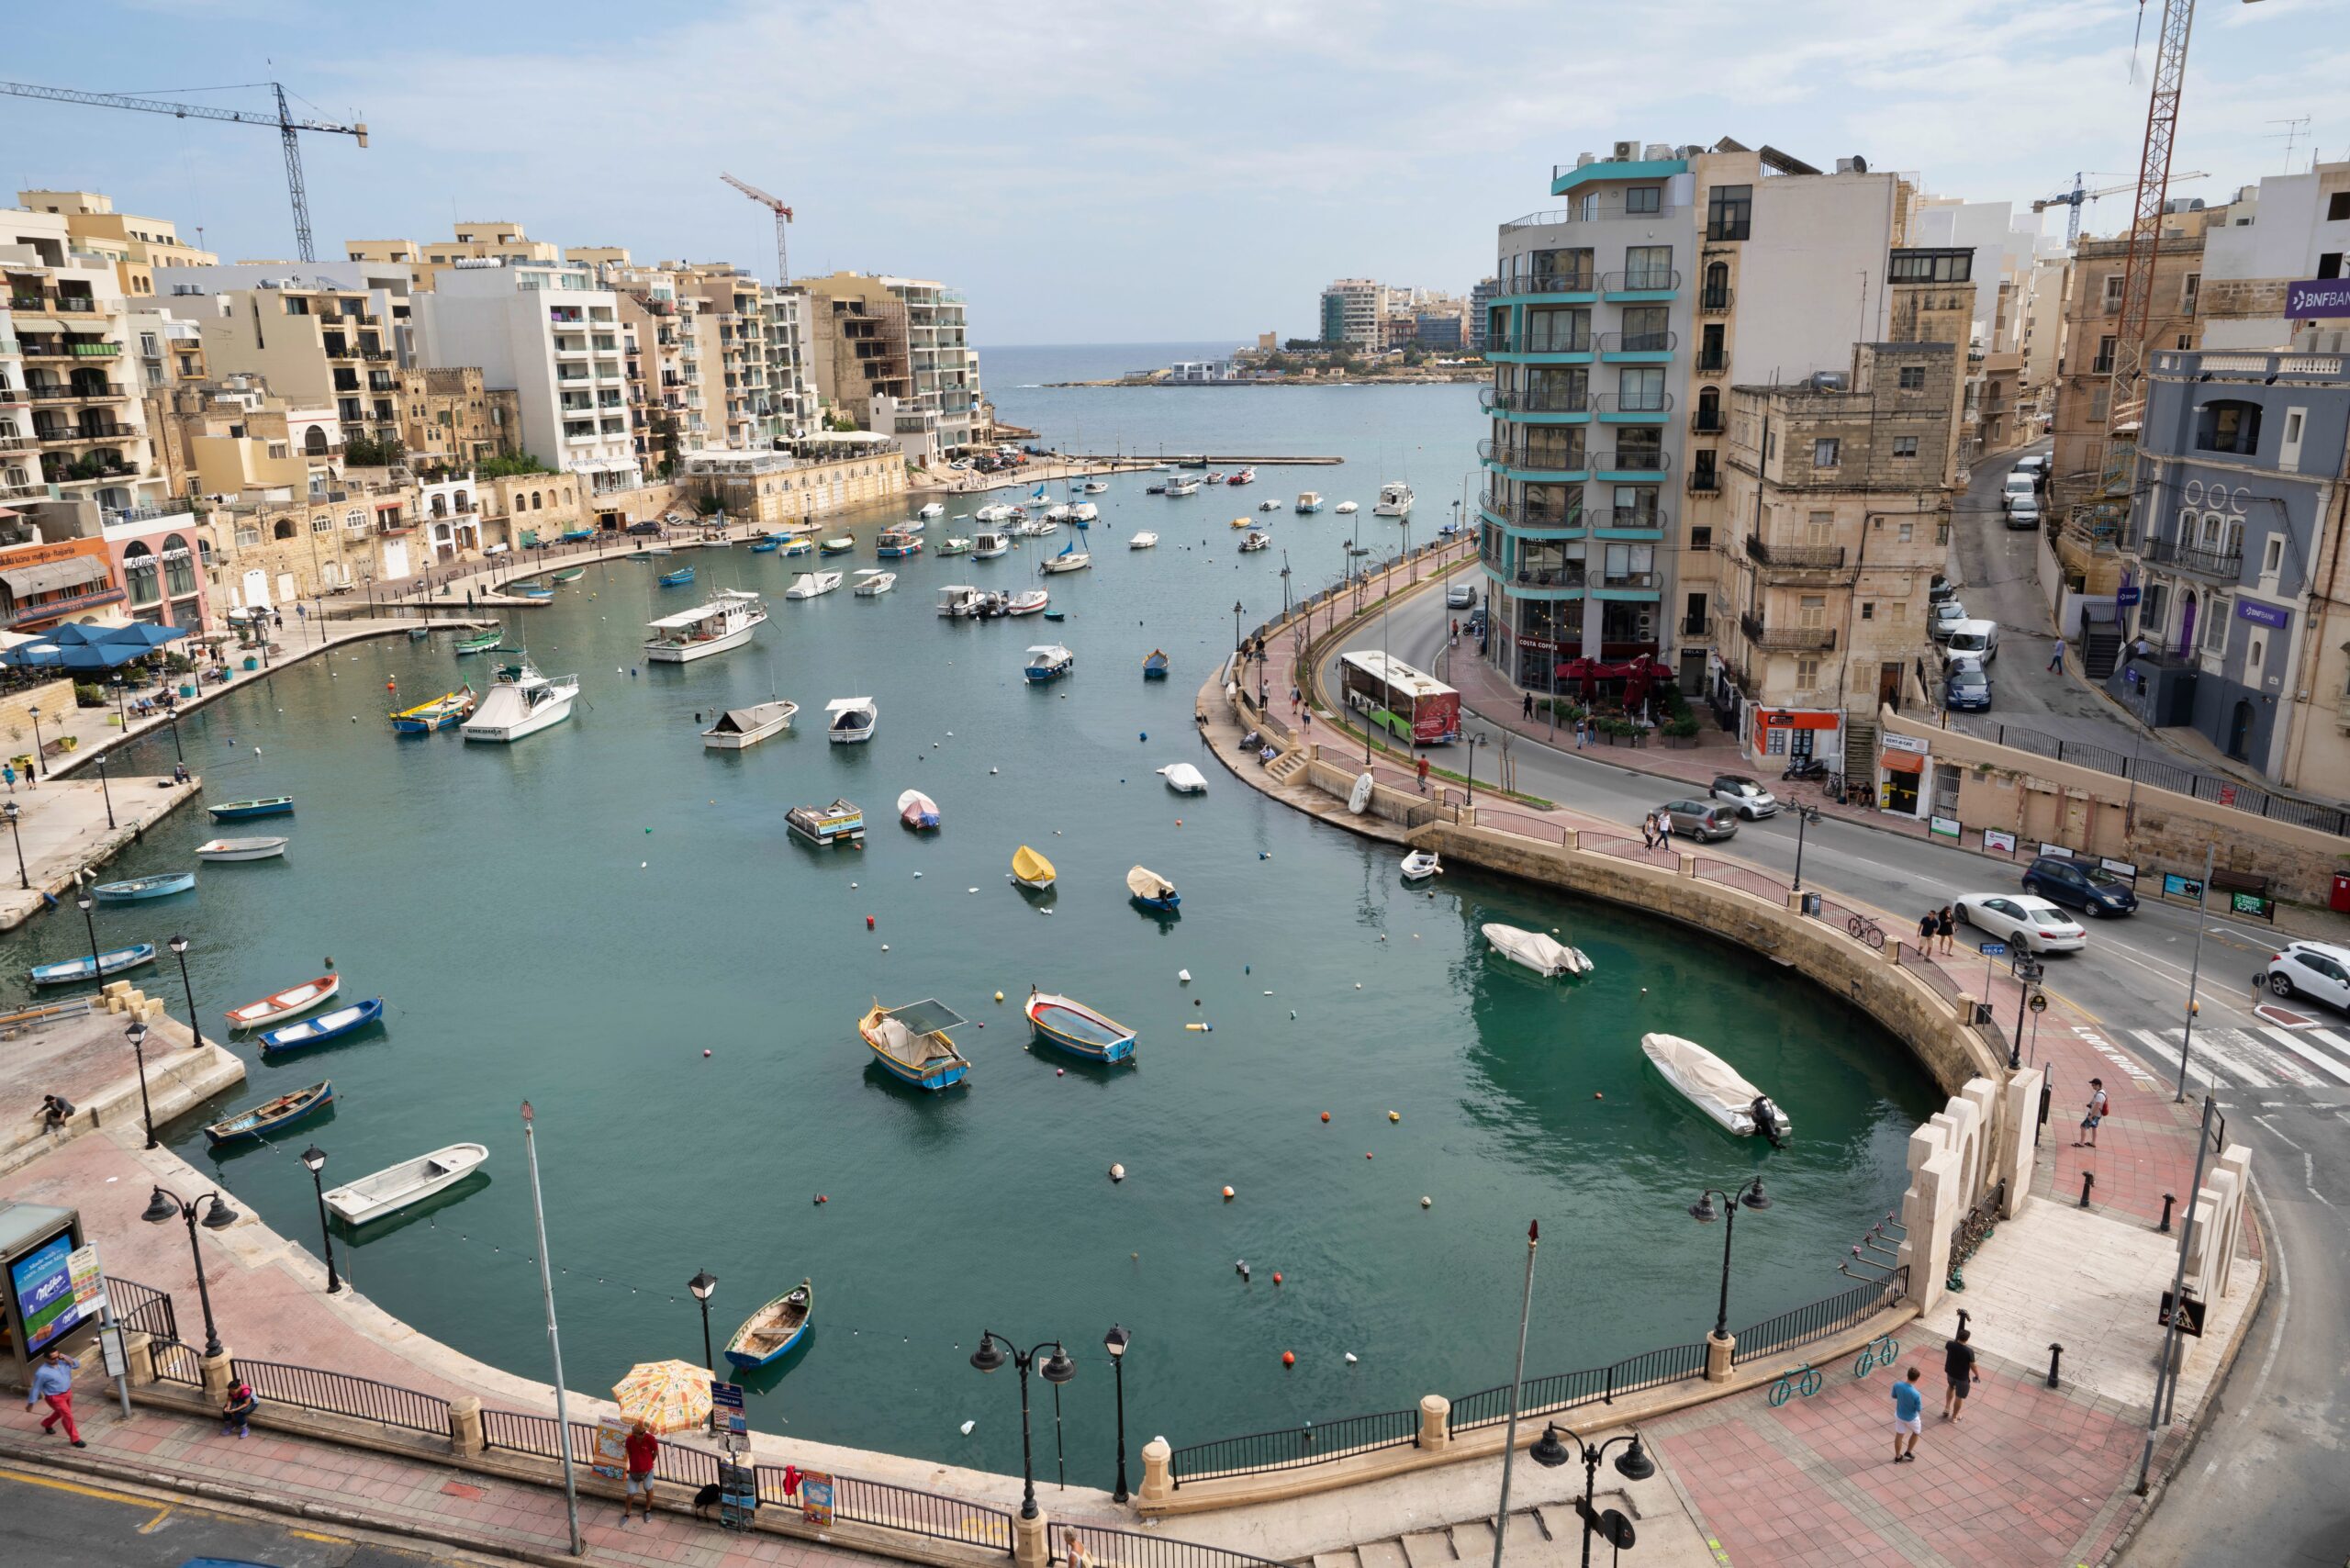 Awesome city view in Malta